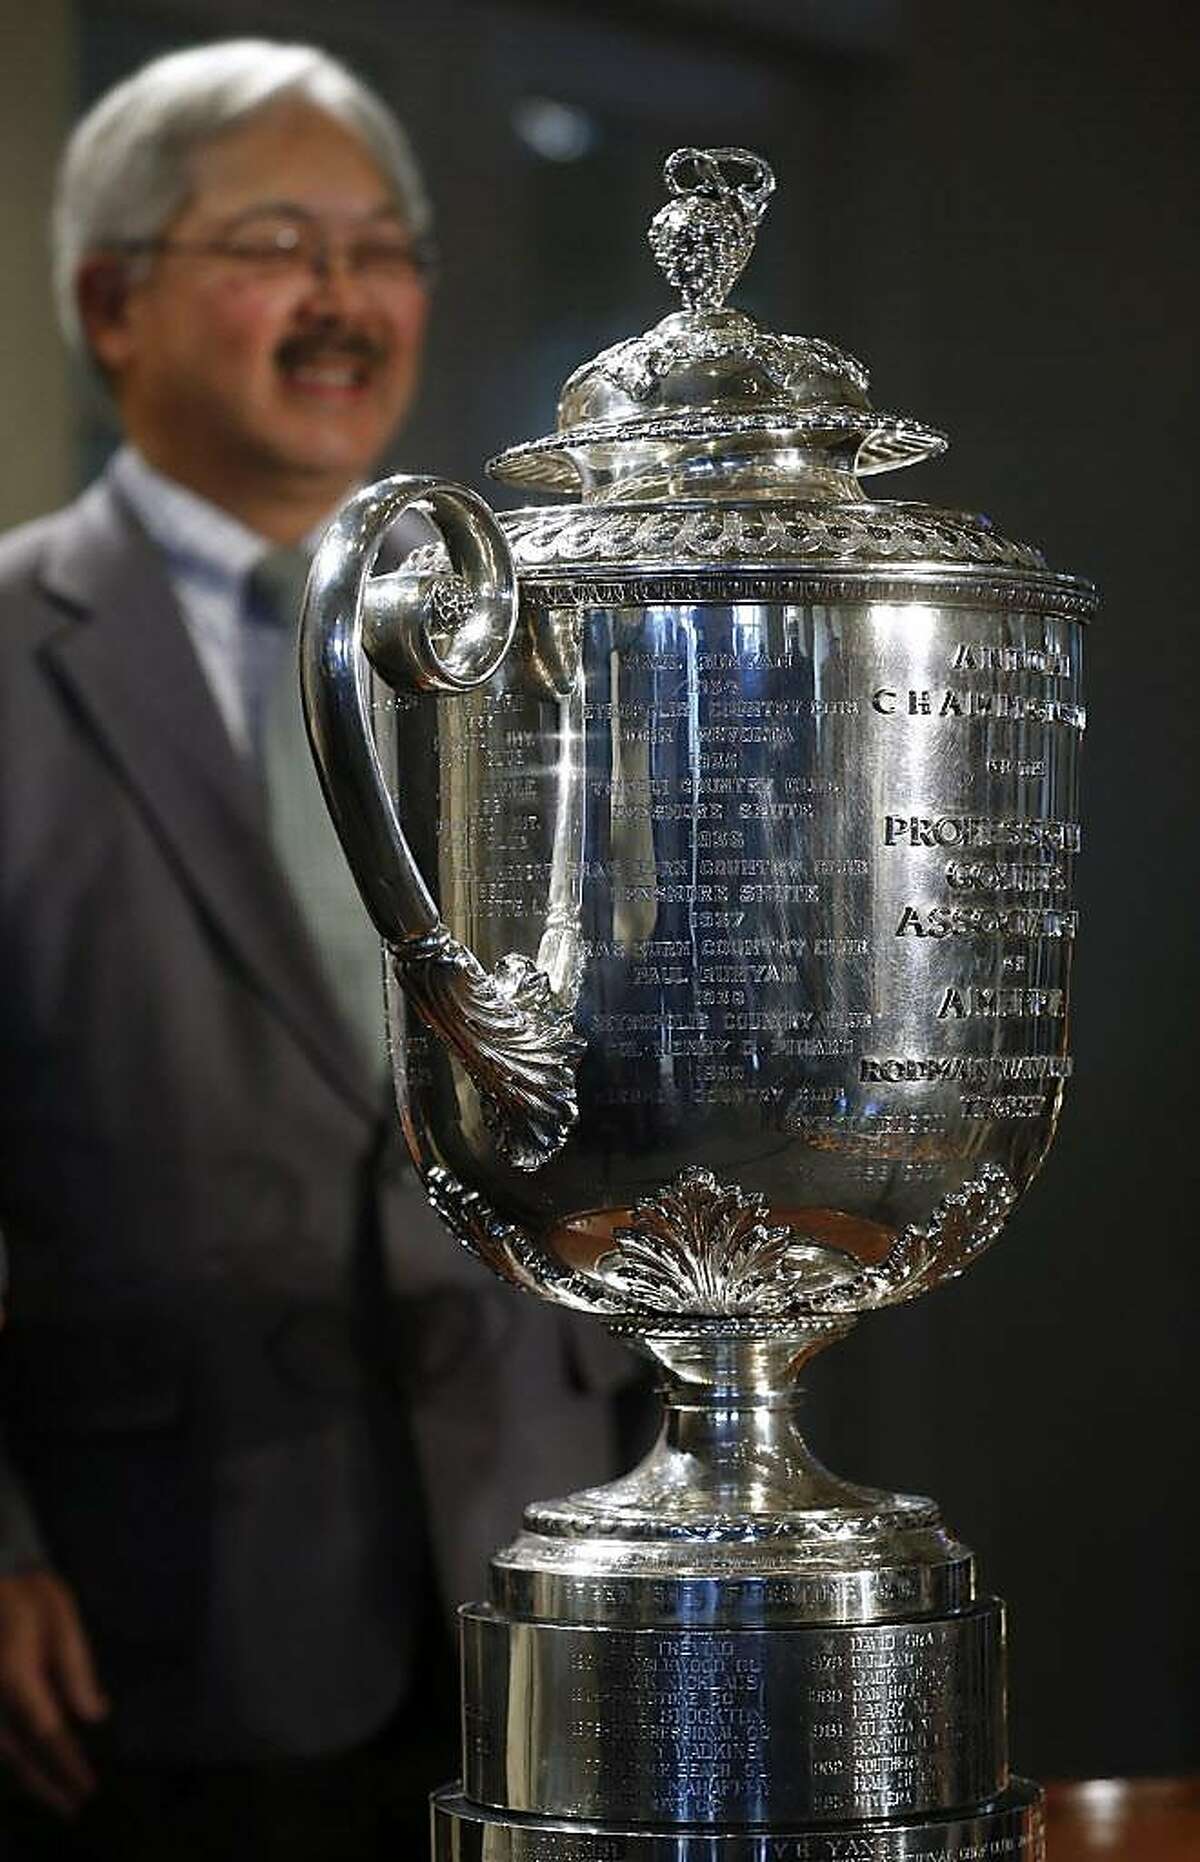 Mayor Ed Lee stands behind the Wanamaker Trophy during an event at the Olympic Club in San Francisco, Calif. on Wednesday, Nov. 8, 2017 to announce that the club will host the 2028 PGA Championship and the Ryder Cup in 2032.